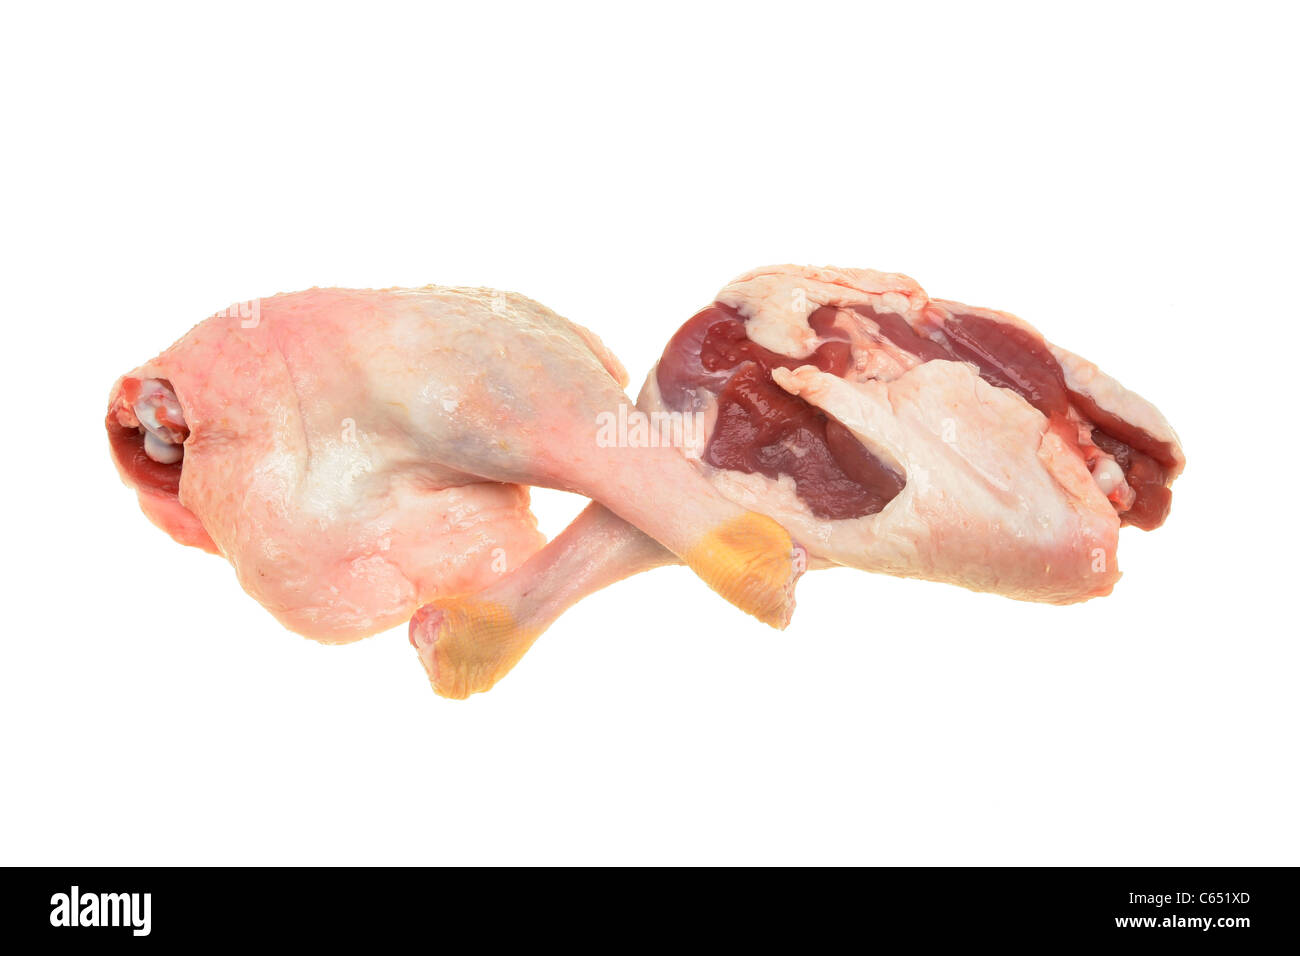 https://c8.alamy.com/comp/C651XD/two-raw-duck-legs-isolated-against-white-C651XD.jpg